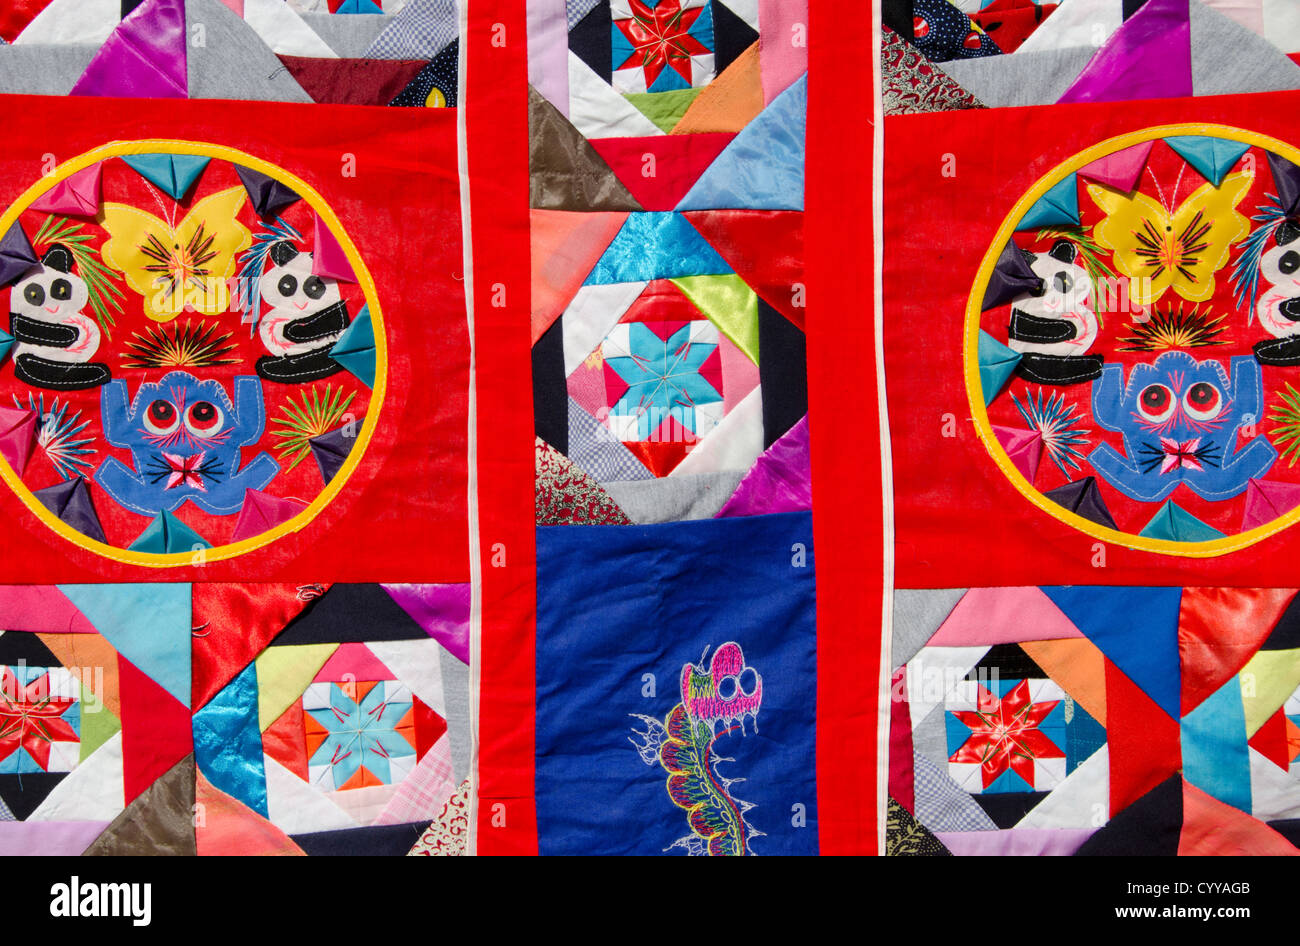 China, Beijing. Traditional Chinese handicrafts. Colorful Chinese embroidery quilt with panda bear, dragon and frog design. Stock Photo